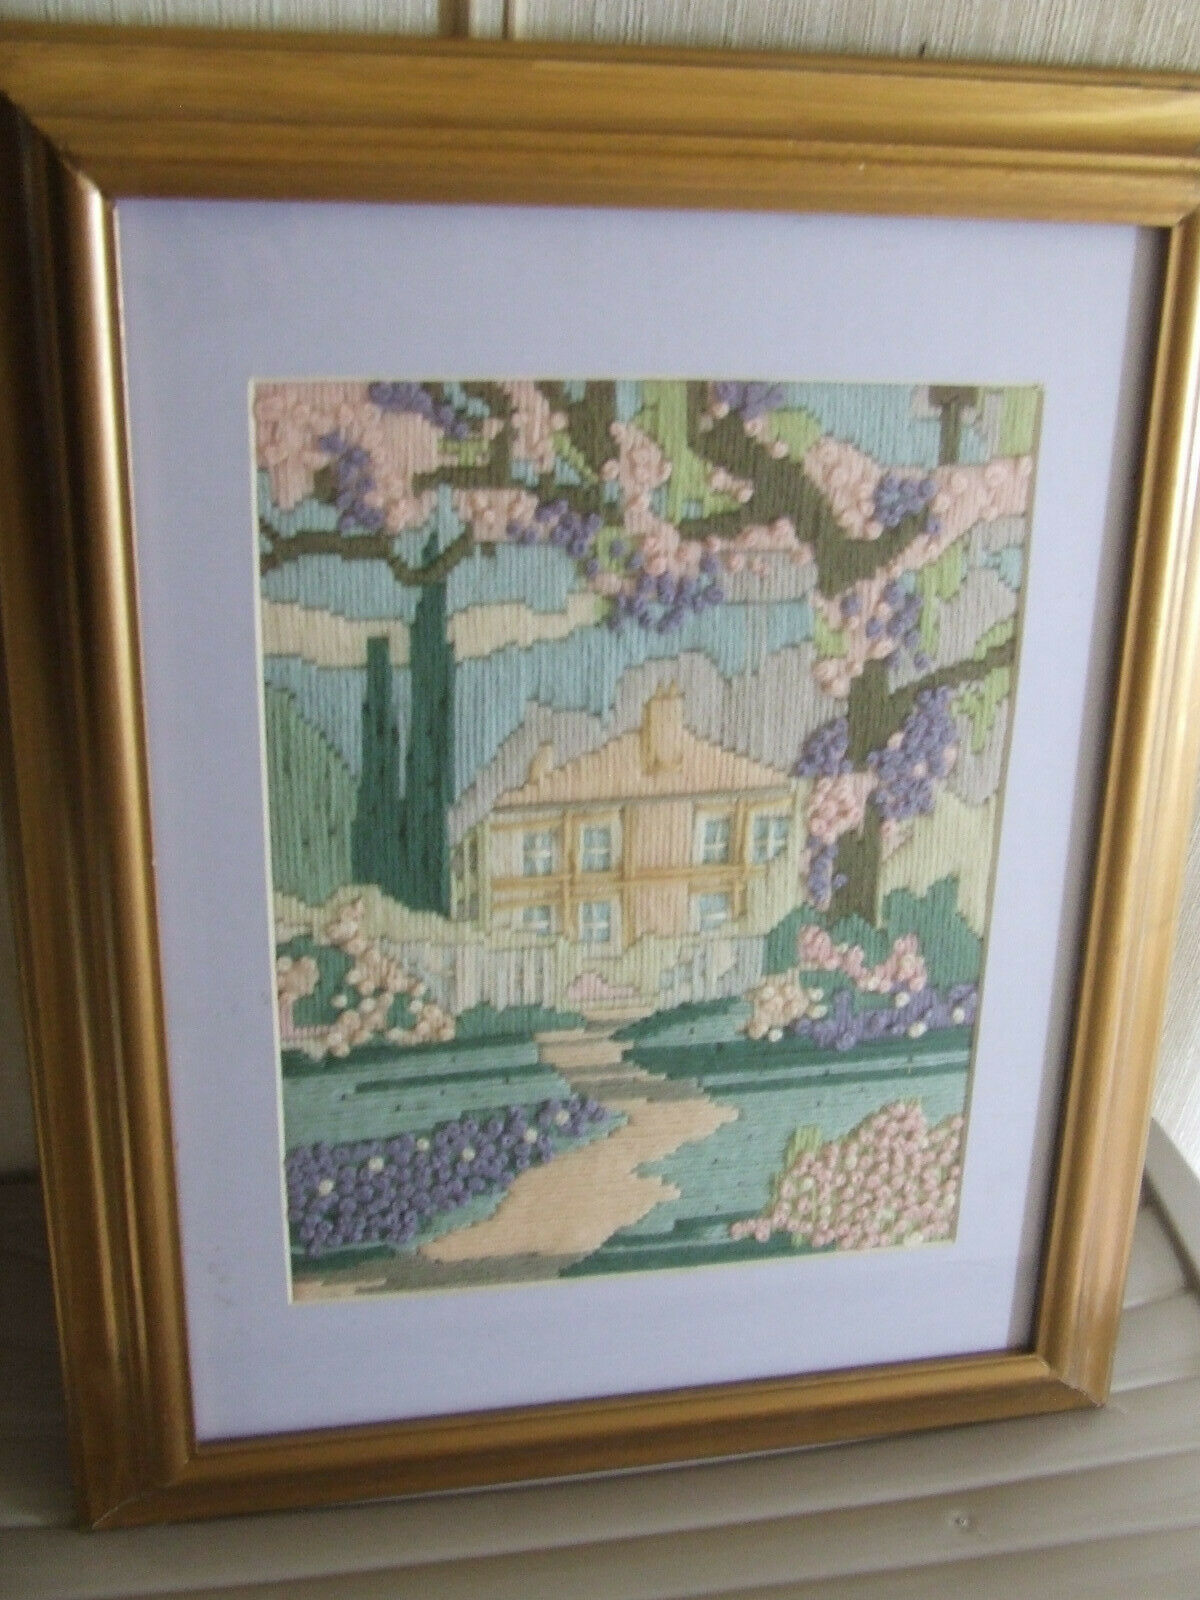 COUNTRY HOUSE & GARDEN FRAMED LONG STITCH TAPESTRY